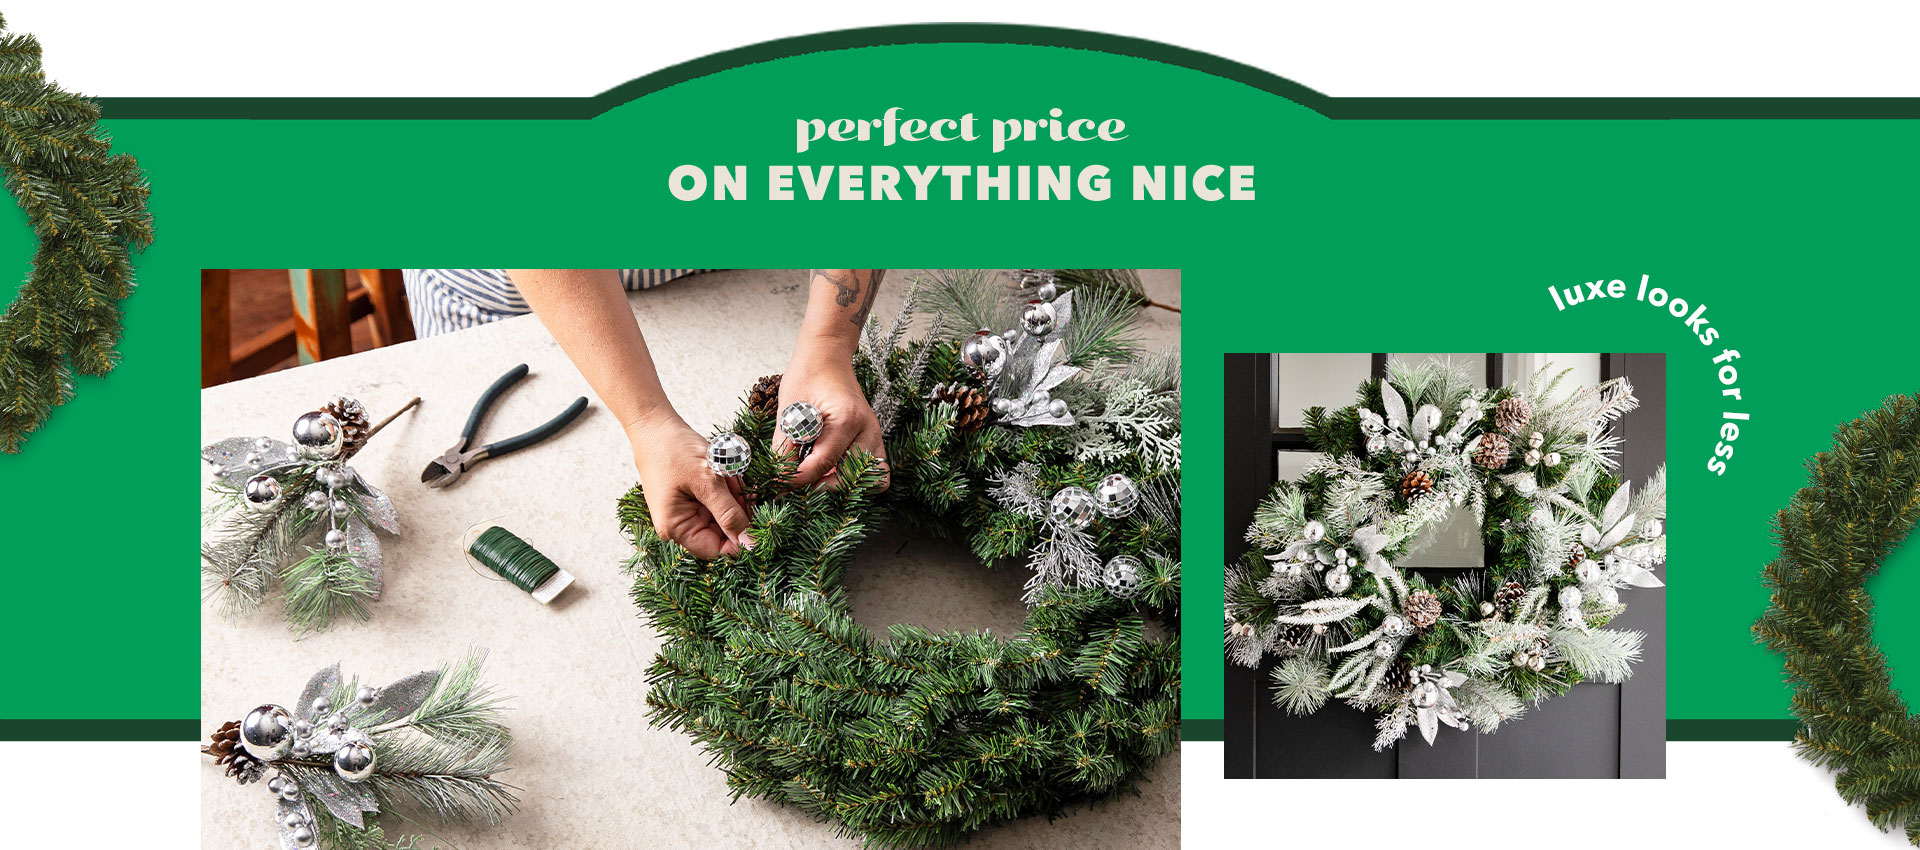 Spruce up your holiday season with easy DIY wreath projects for Christmas